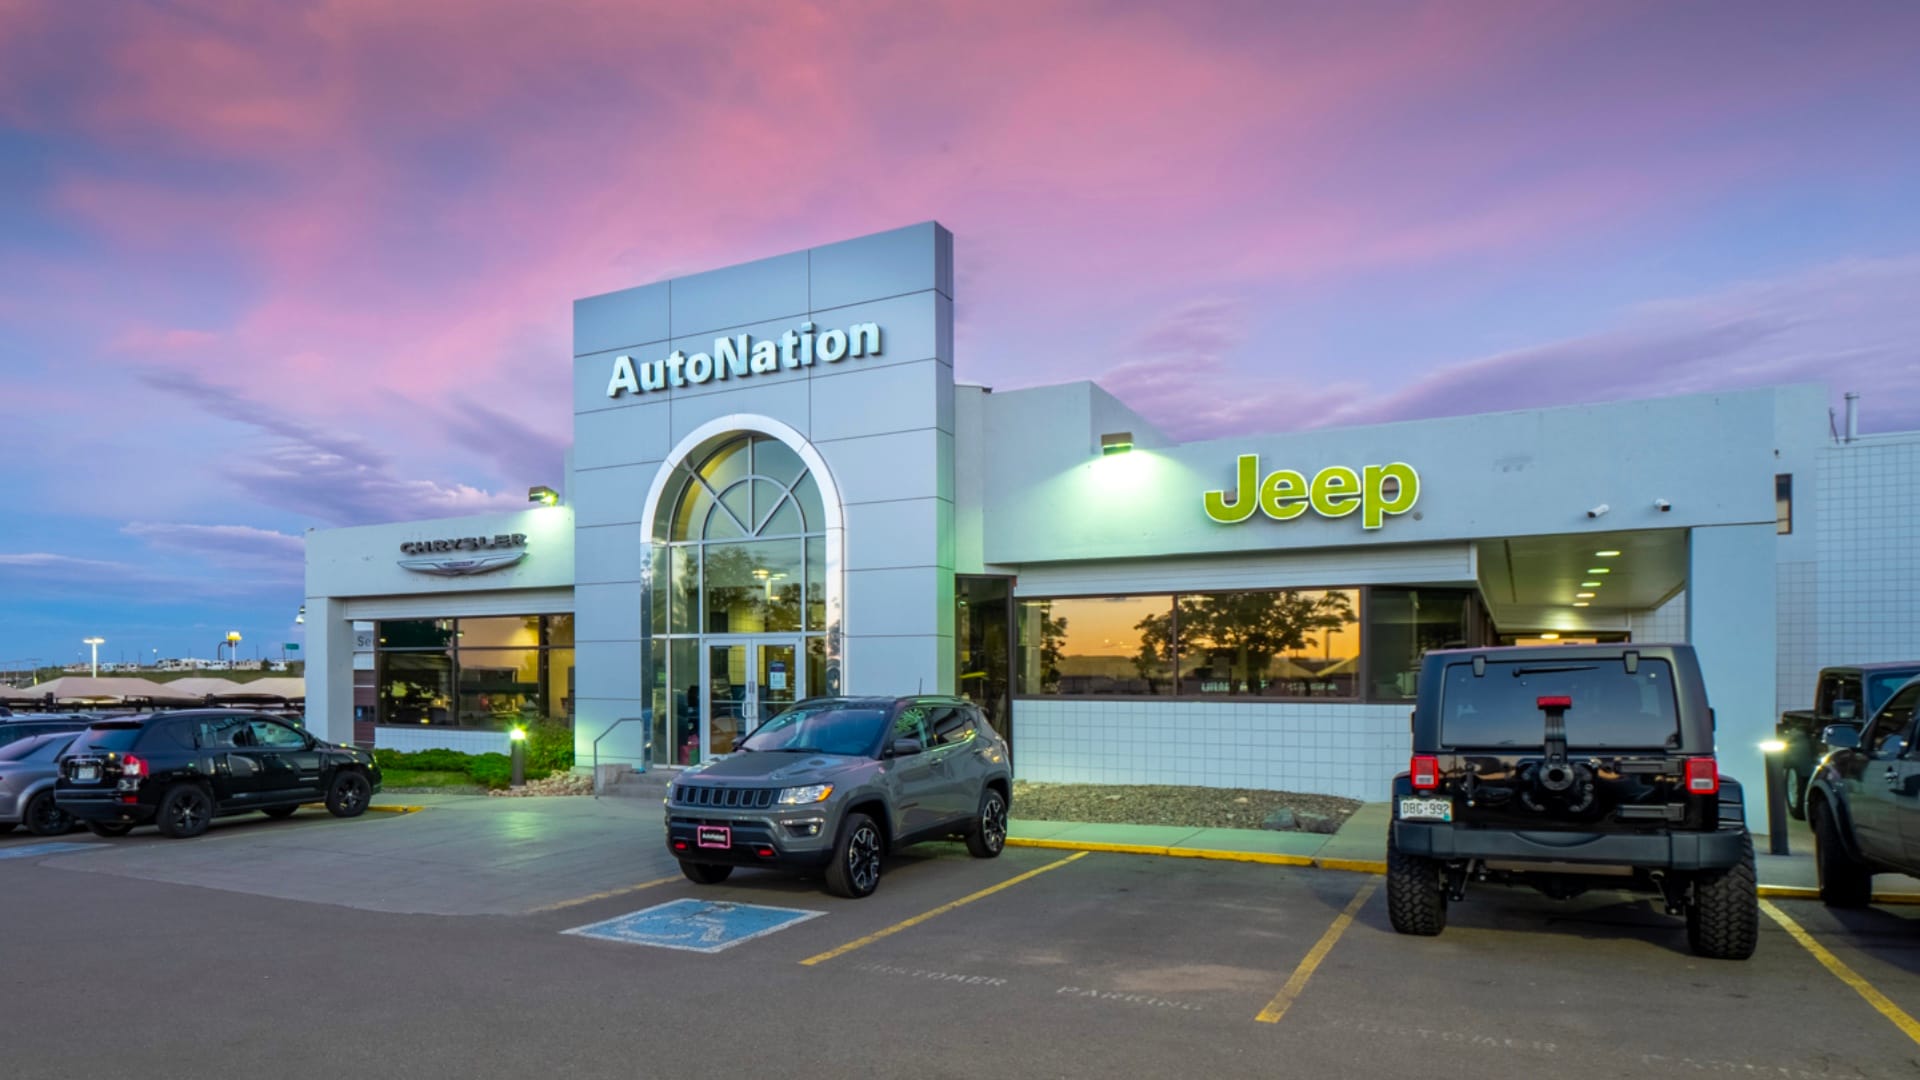 Exterior view of AutoNation Chrysler Jeep West during a sunrise or sunset. Many vehicles parked near the grey building. Trees and greenery are visible around the parking lot and surrounding area.